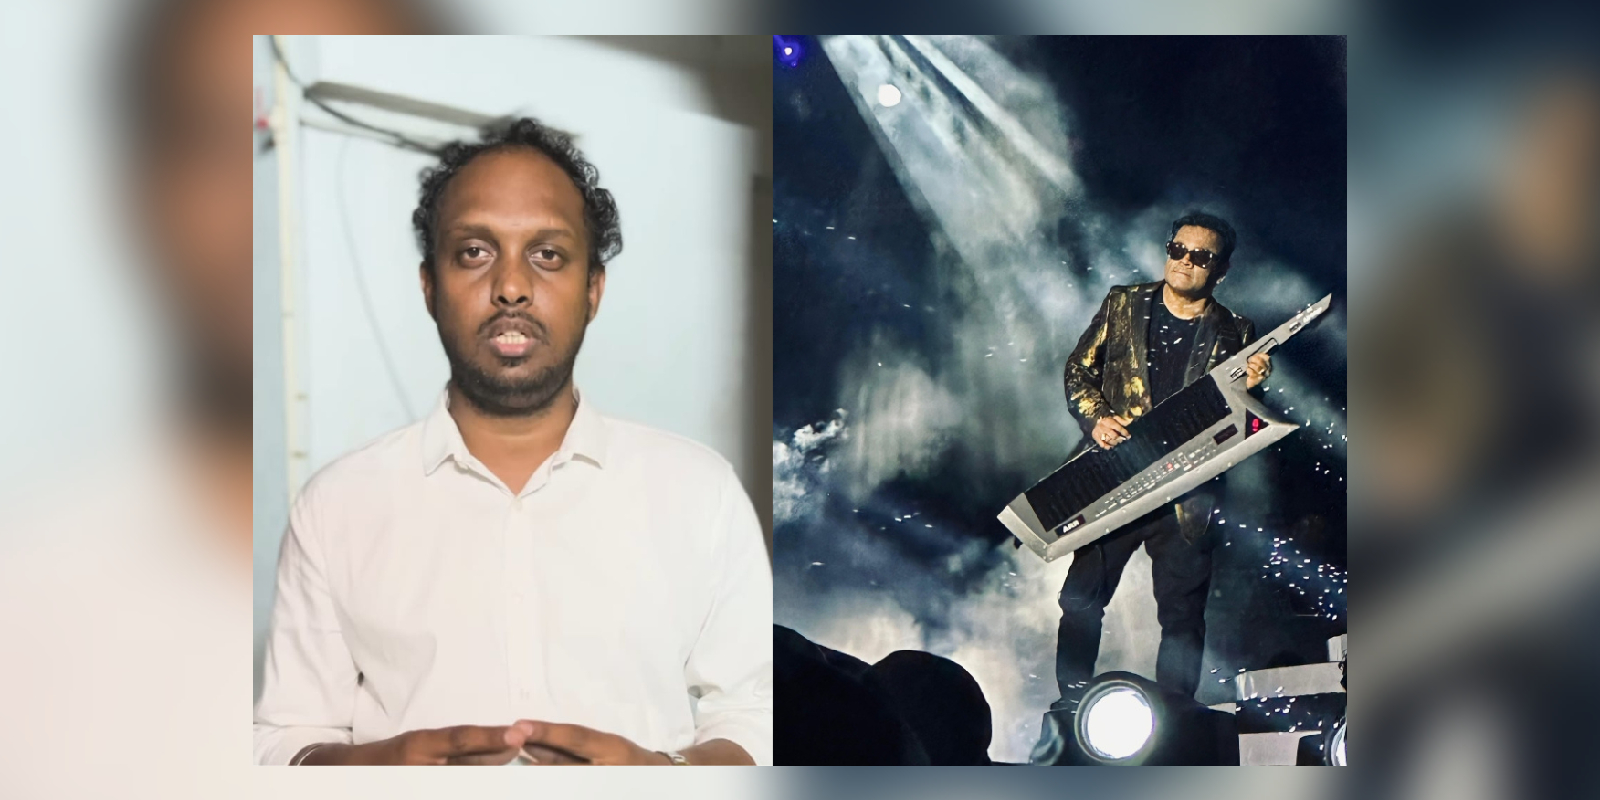 ACTC founder Hemanth takes full responsibility for AR Rahman concert mishap